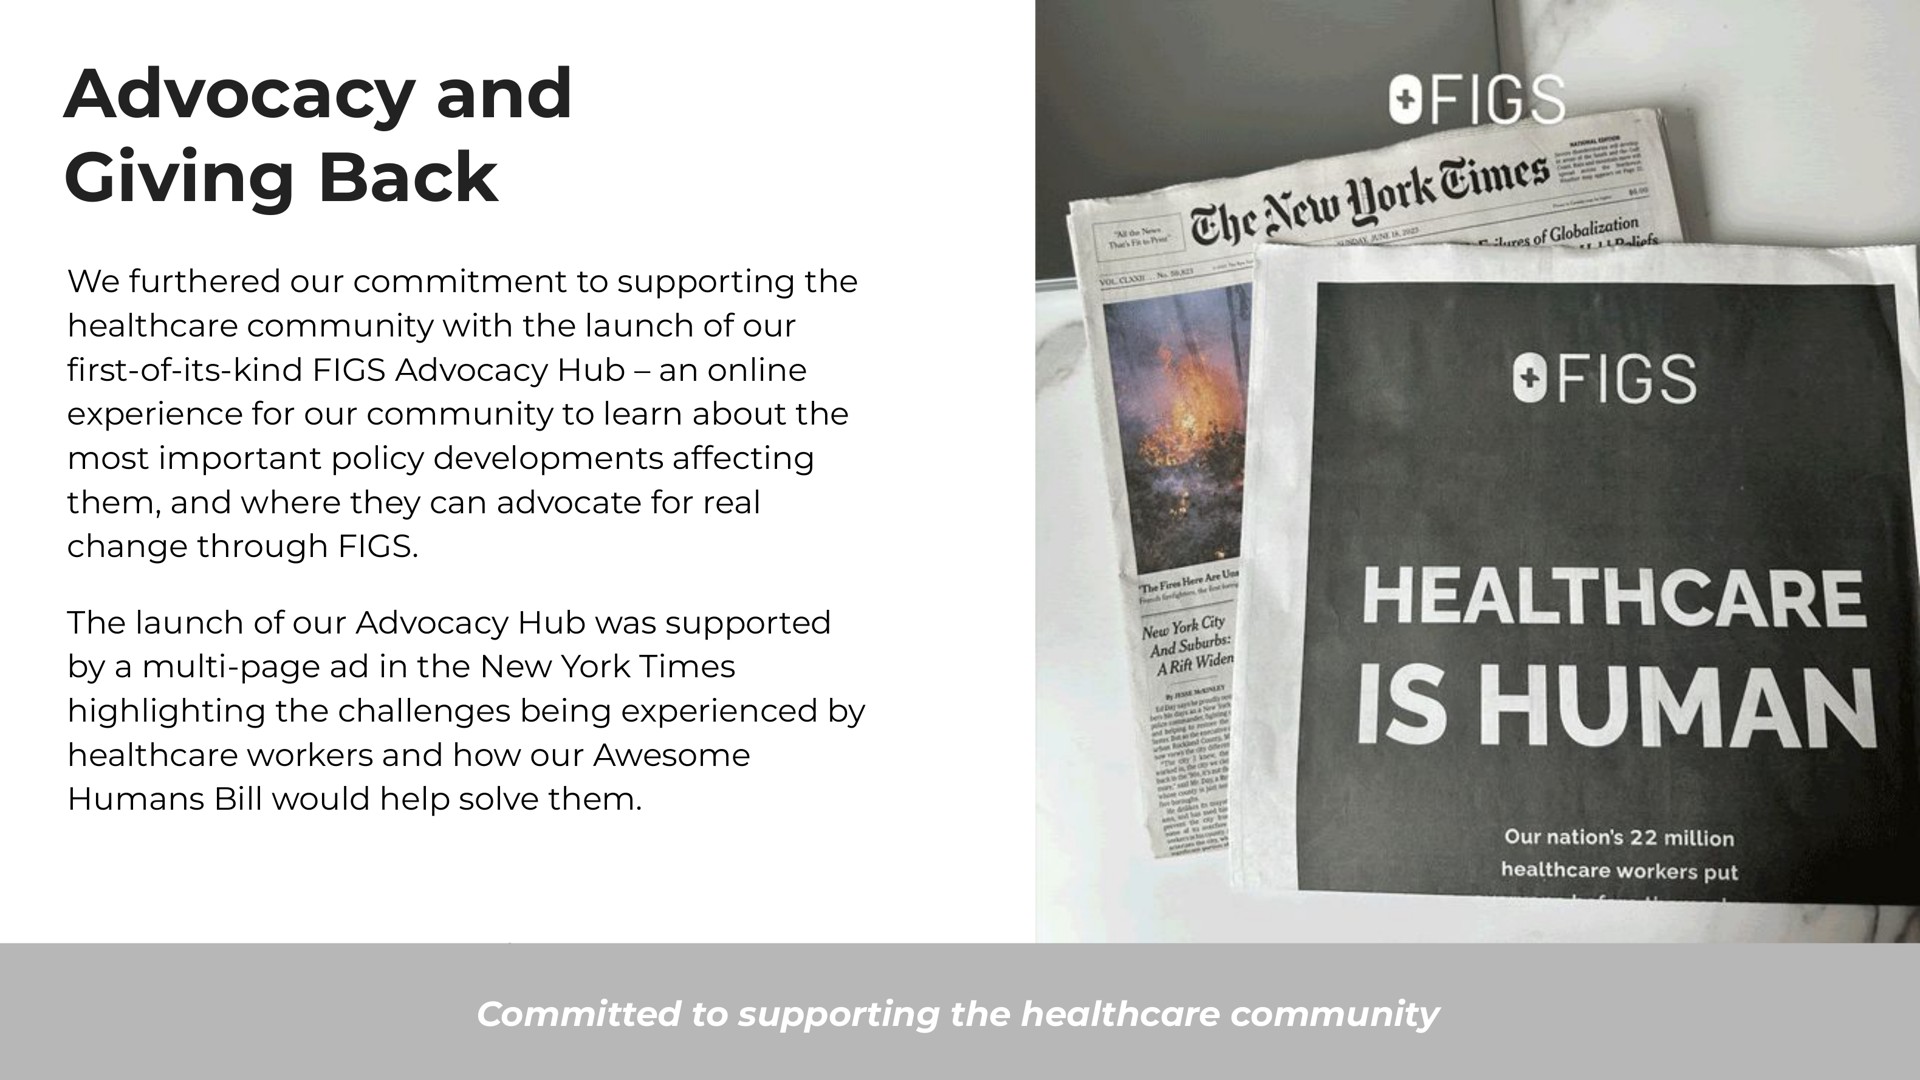 advocacy and giving back we furthered our commitment to supporting the community with the launch of our first of its kind figs advocacy hub an experience for our community to learn about the most important policy developments affecting them and where they can advocate for real change through figs the launch of our advocacy hub was supported by a page in the new york times highlighting the challenges being experienced by workers and how our awesome humans bill would help solve them thee times | FIGS